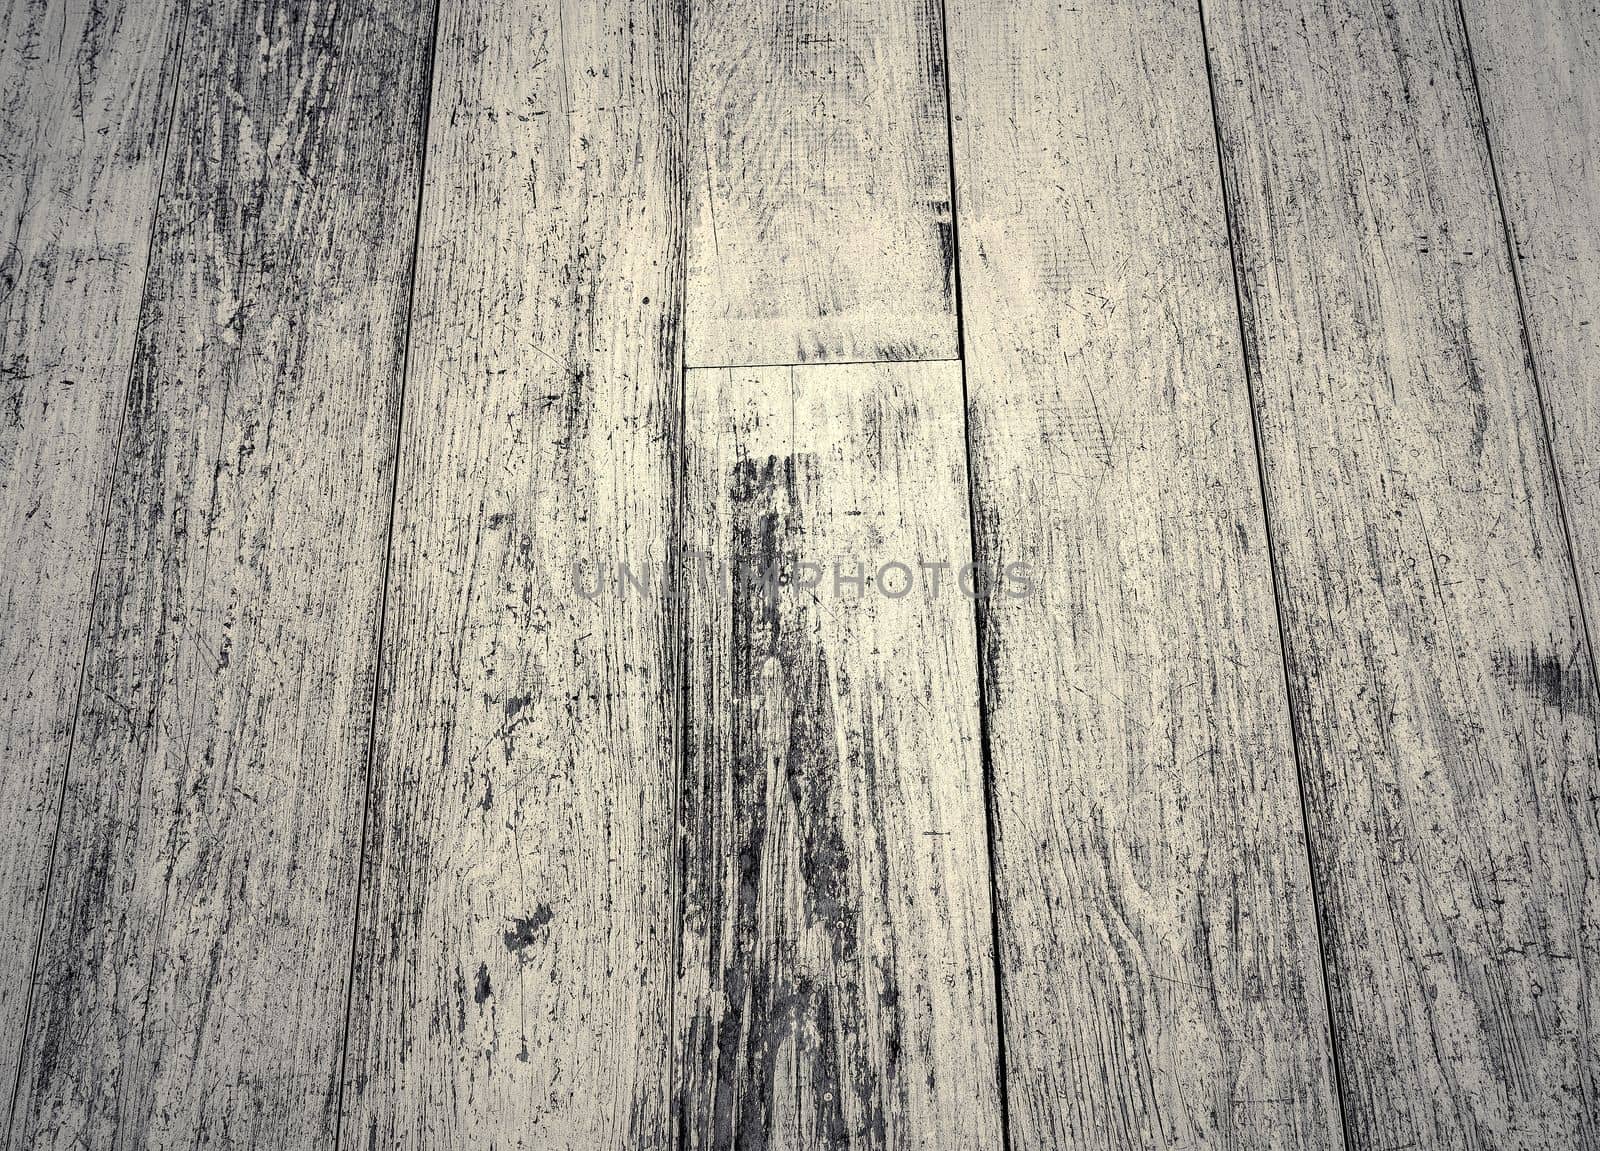 Wooden surface of planks and grain textures in a high resolution